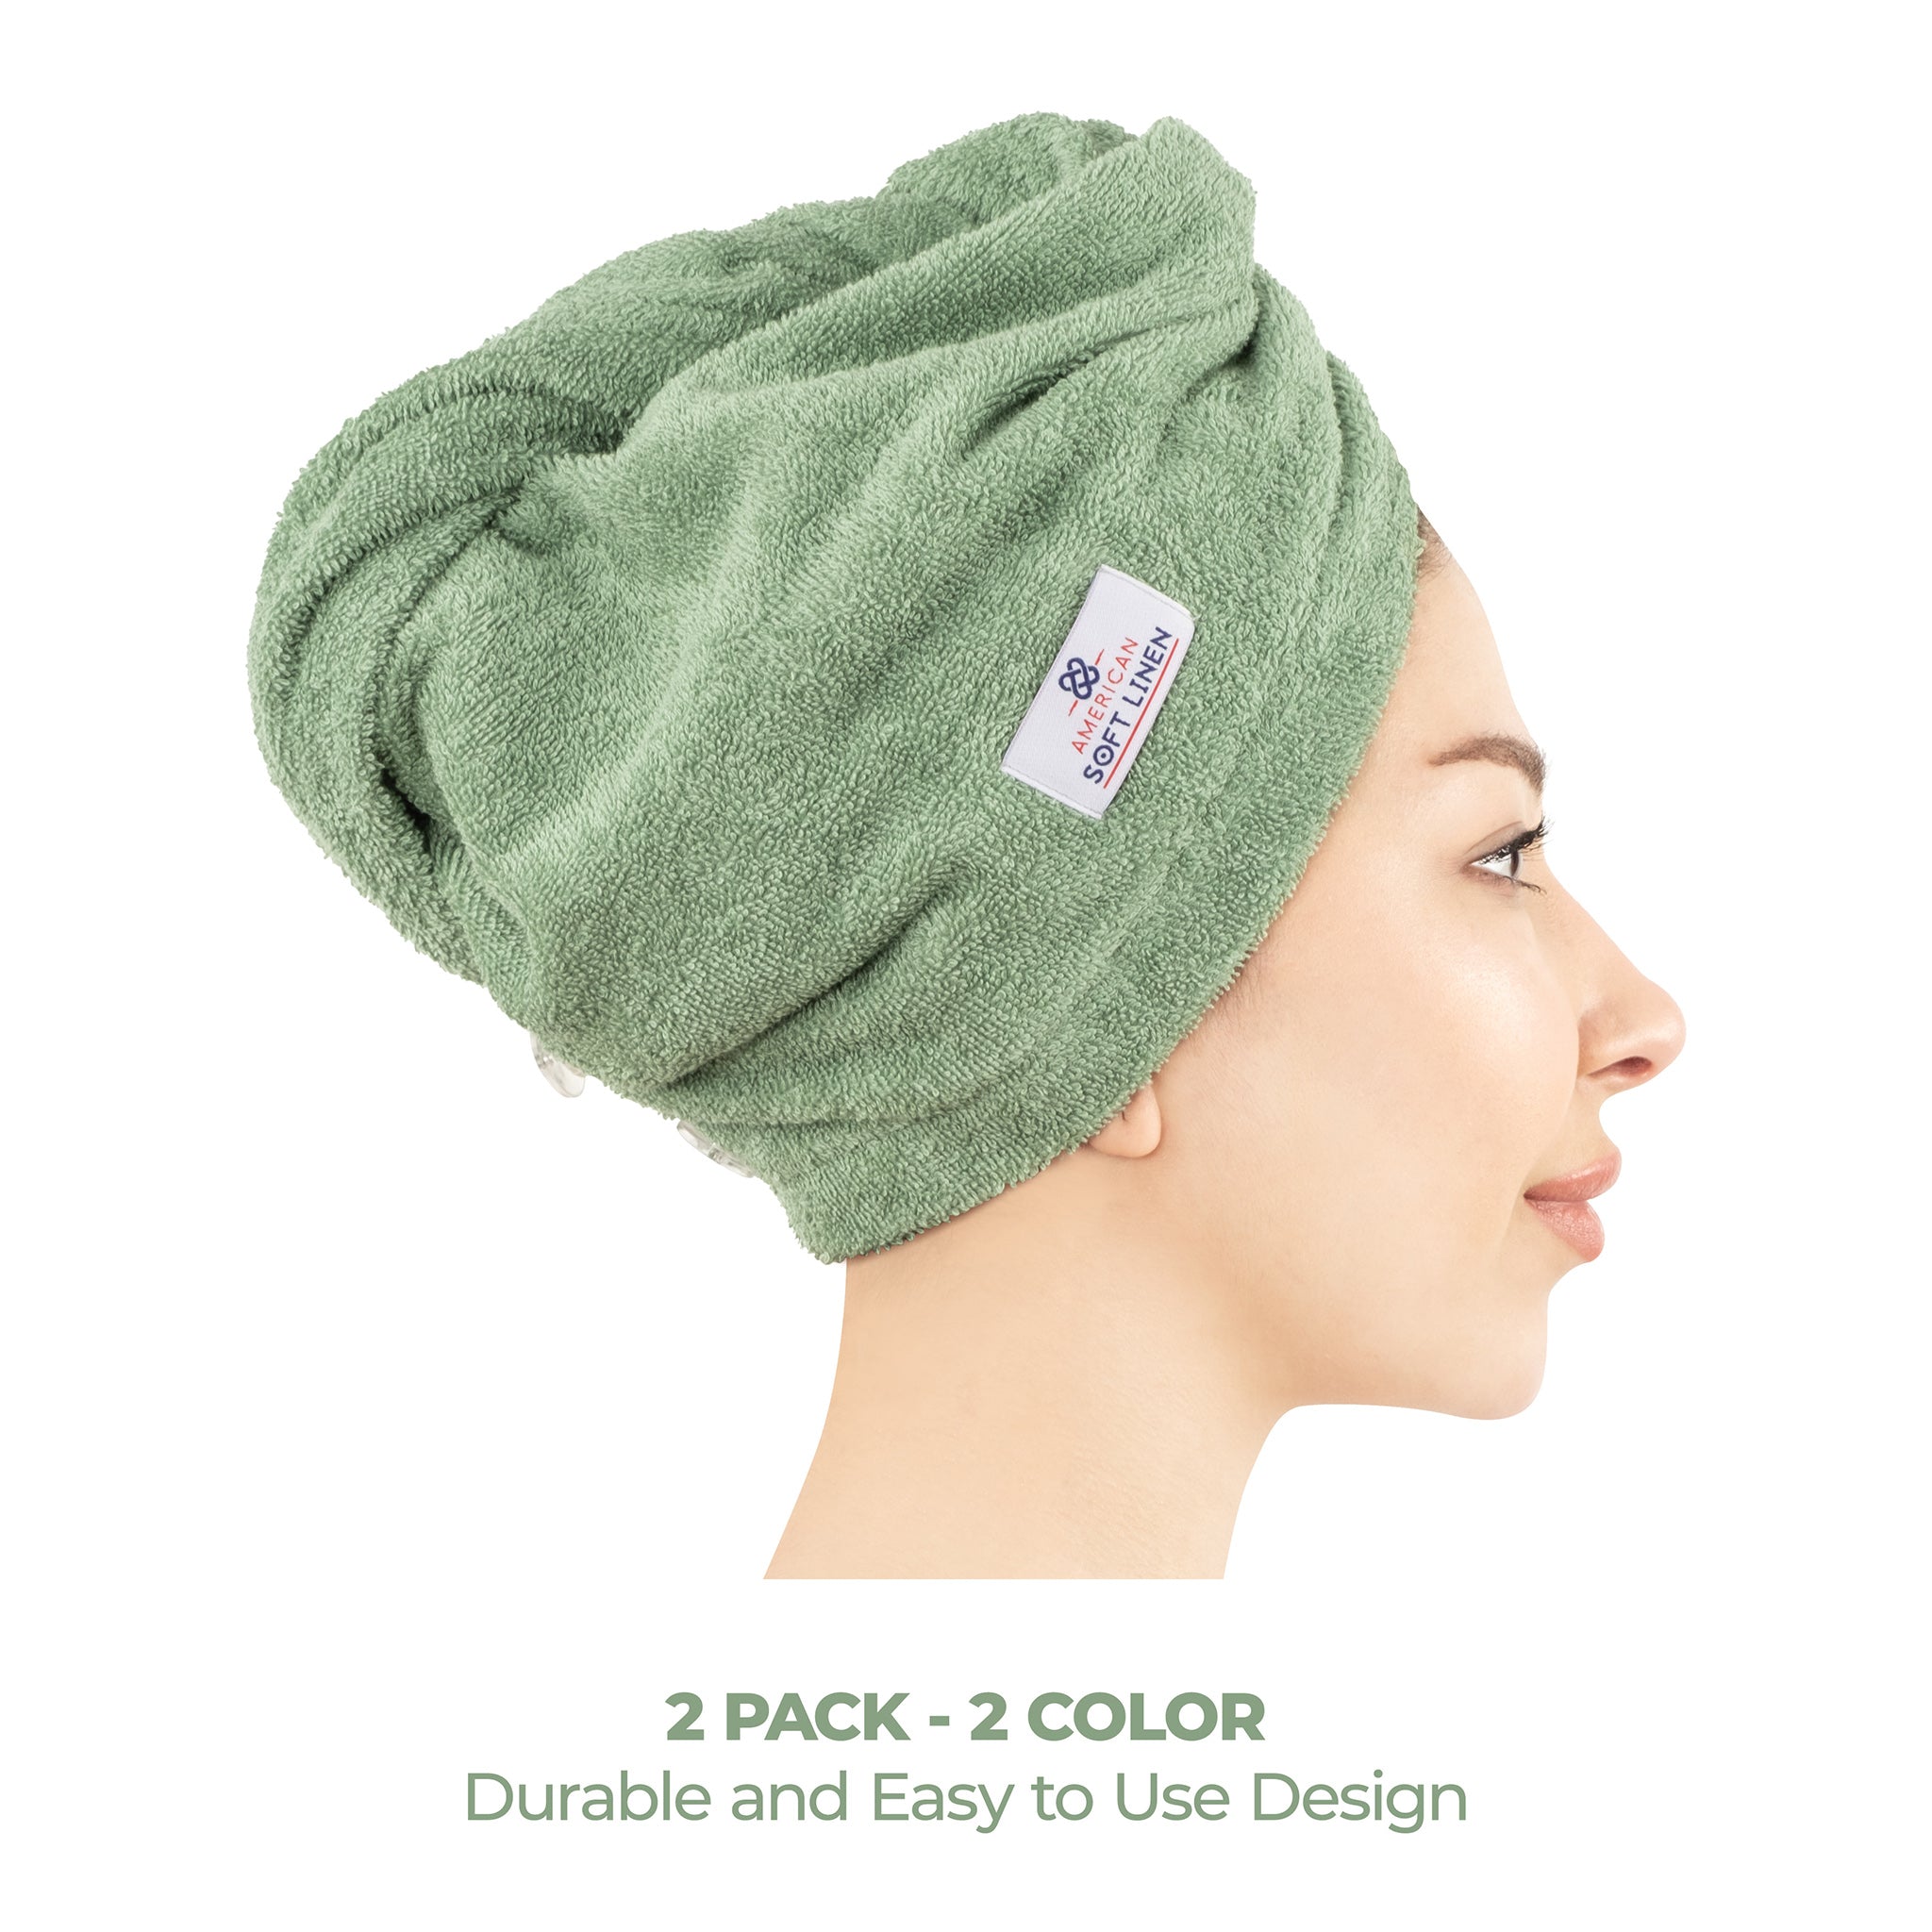 American Soft Linen 100% Cotton Hair Drying Towels for Women 2 pack 75 set case pack white-sage green-4